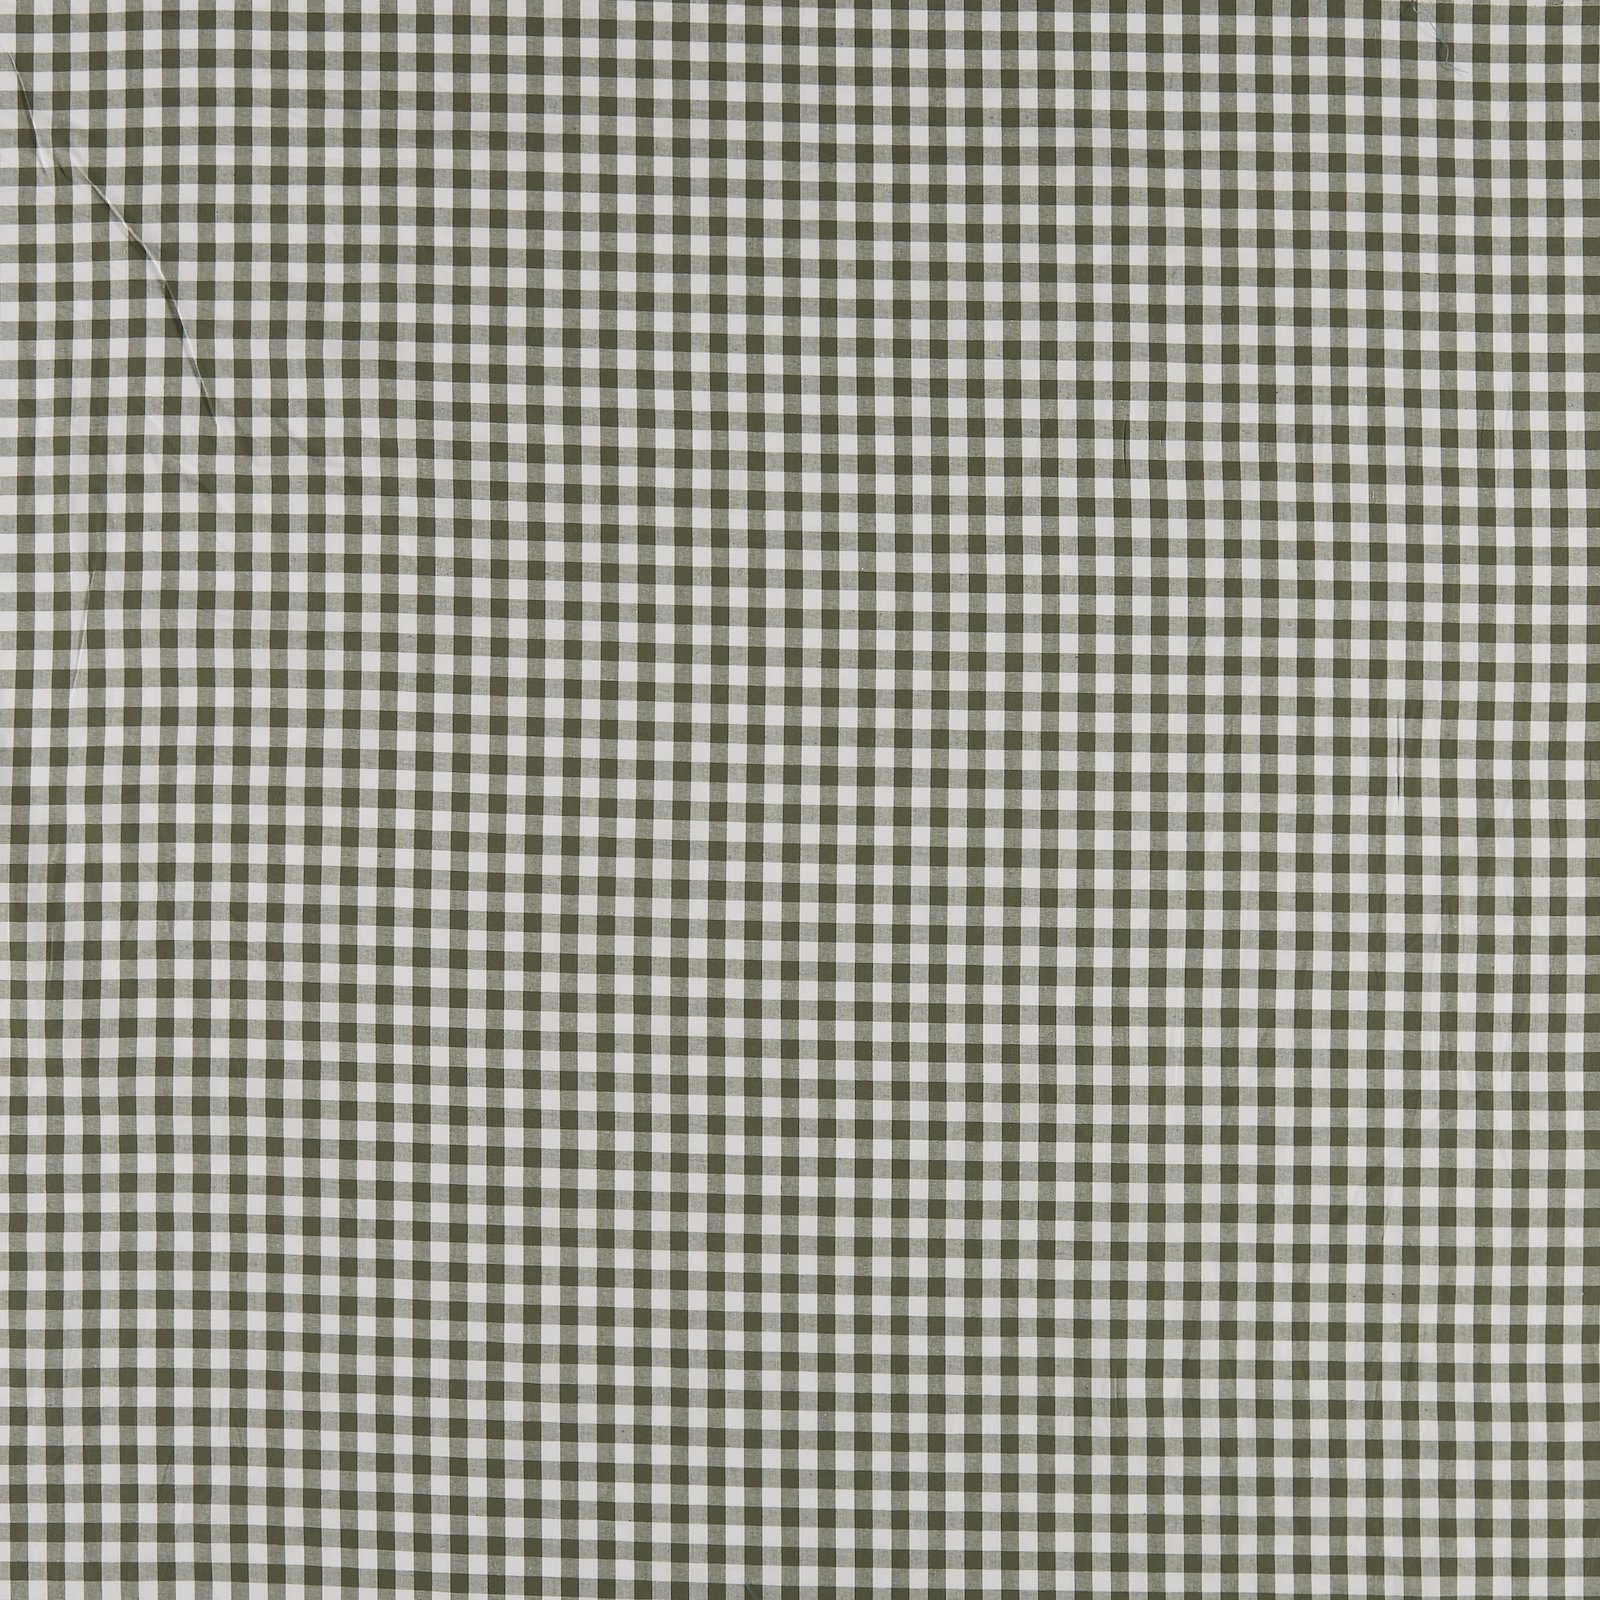 Cotton yarn dyed army/white check 780896_pack_sp